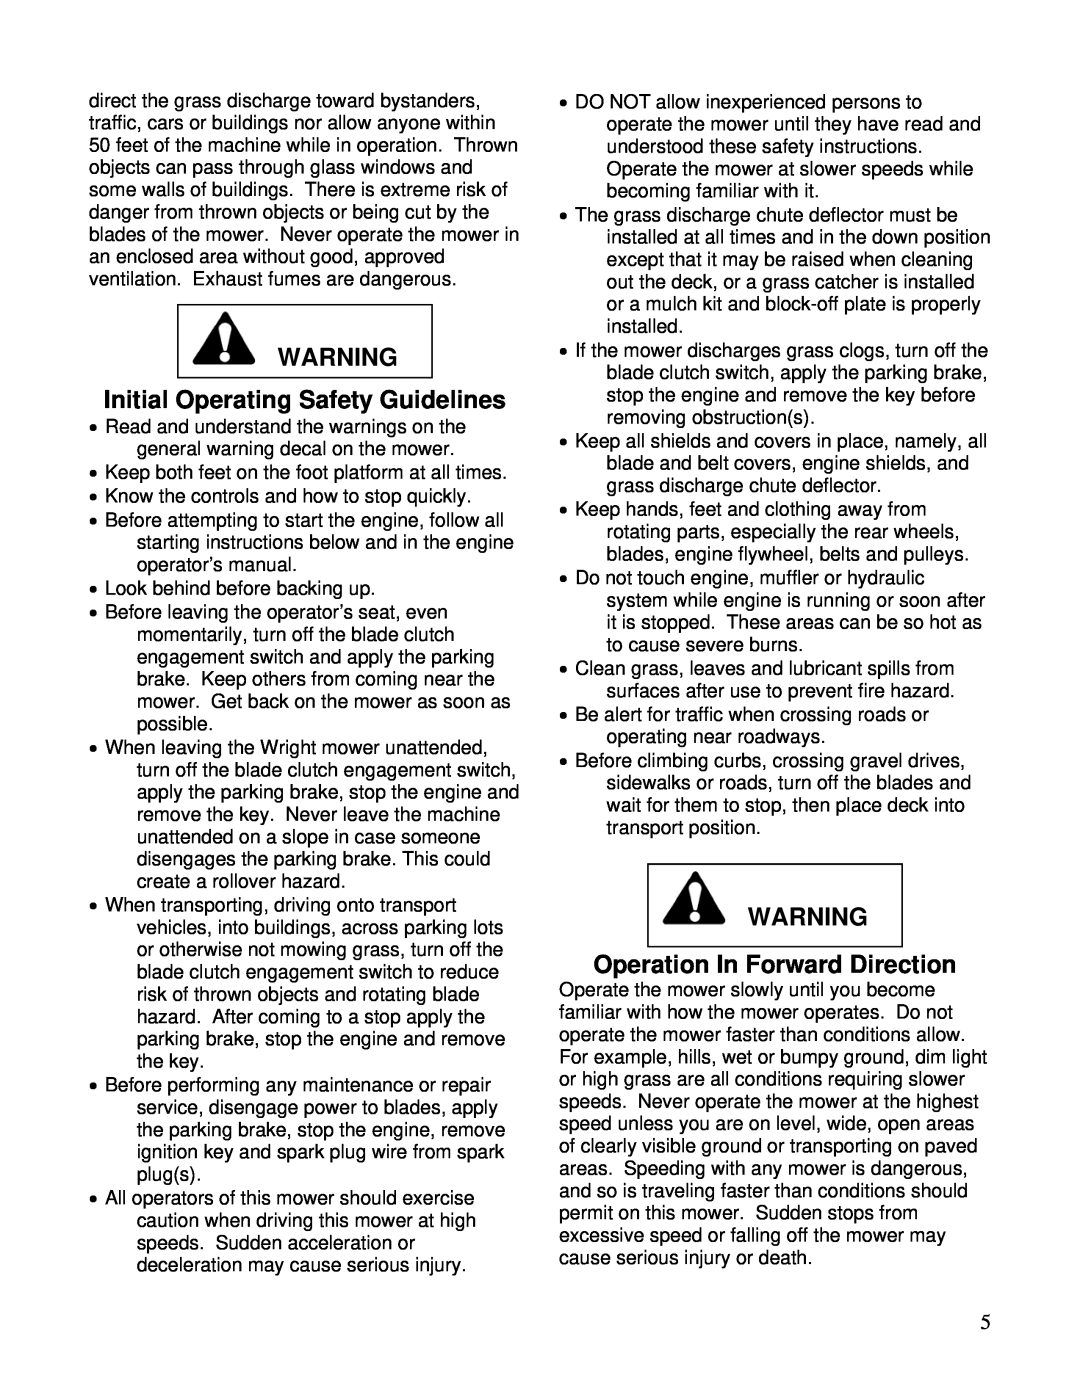 Wright Manufacturing 31897 owner manual Initial Operating Safety Guidelines, Operation In Forward Direction 